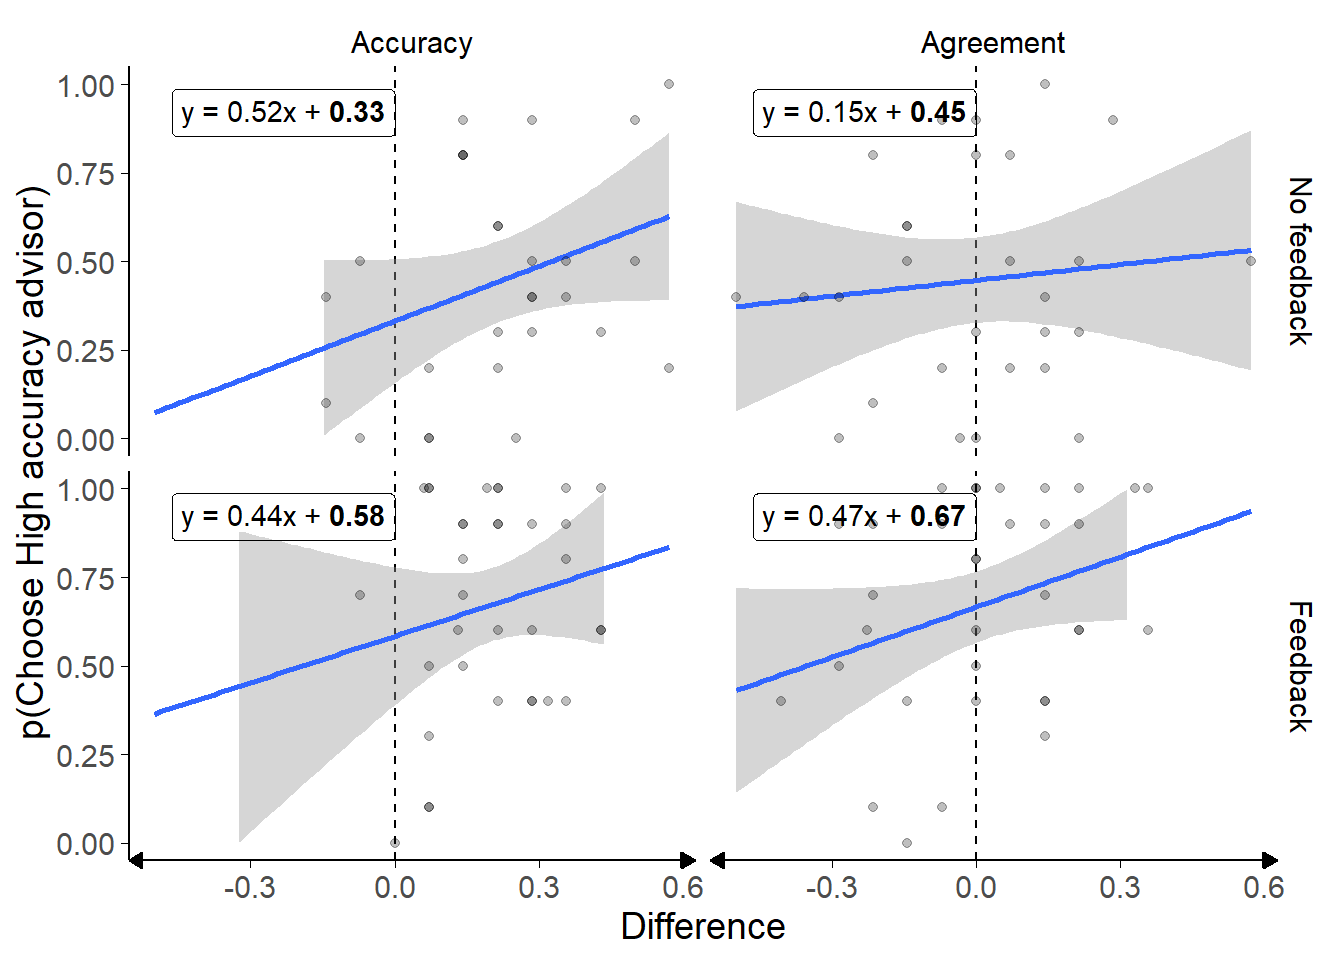 Preference predictors in the Dates task with in/accurate advisors.<br/> Scatter plots of participants' experience with advisors in terms of agreement or accuracy rates. Differences are expressed as the experienced rate for the High accuracy advisor minus the experienced rate for the Low accuracy advisor during the Familiarisation phase. Numbers in bold in the regression equations are significant at p < .05.